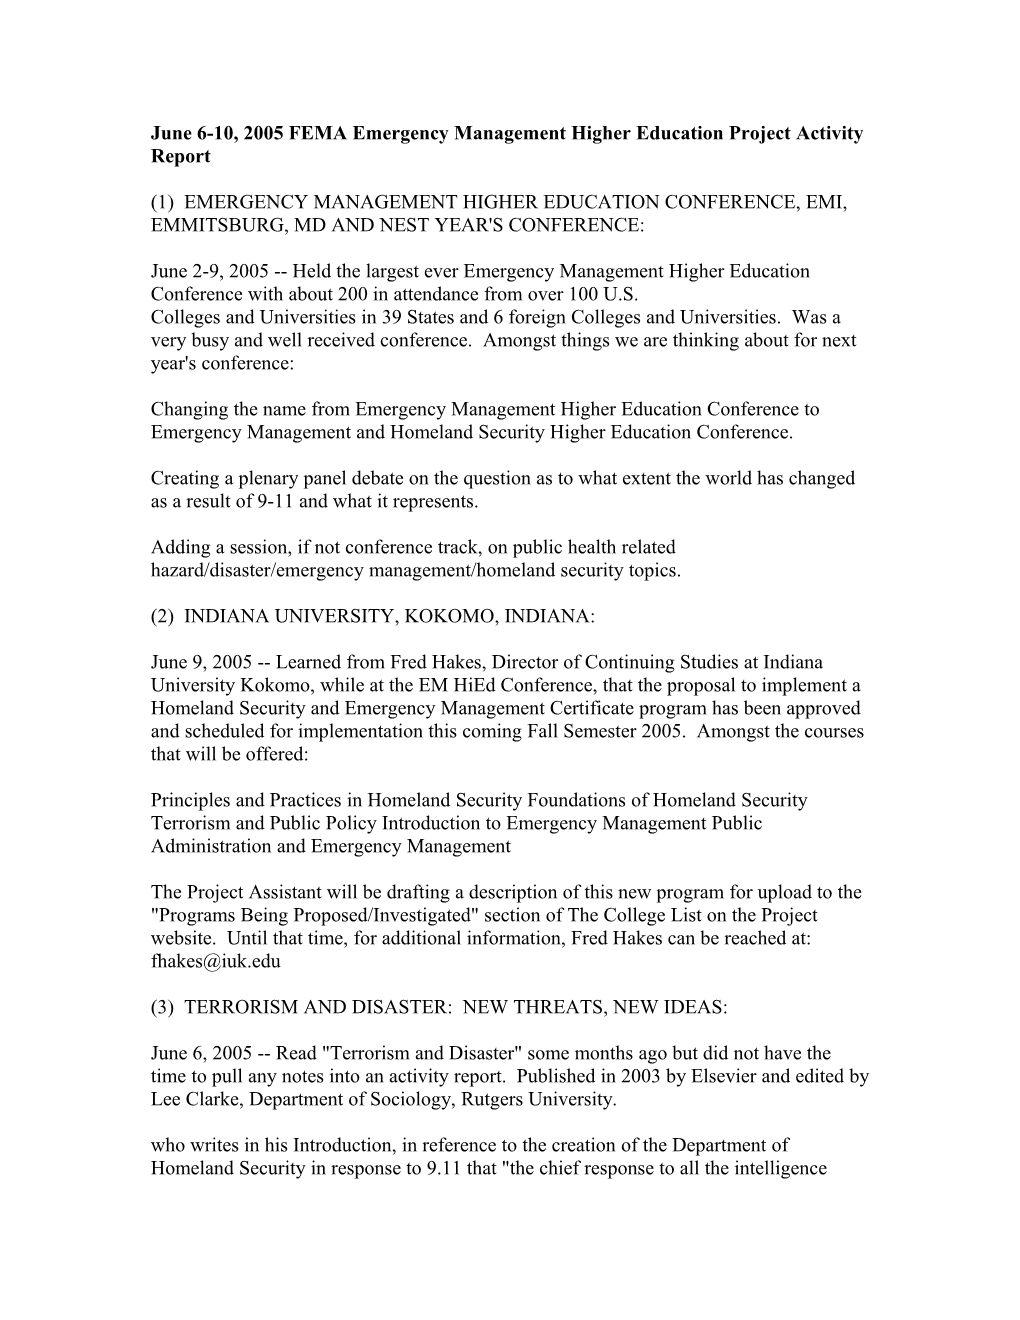 June 6-10, 2005 FEMA Emergency Management Higher Education Project Activity Report